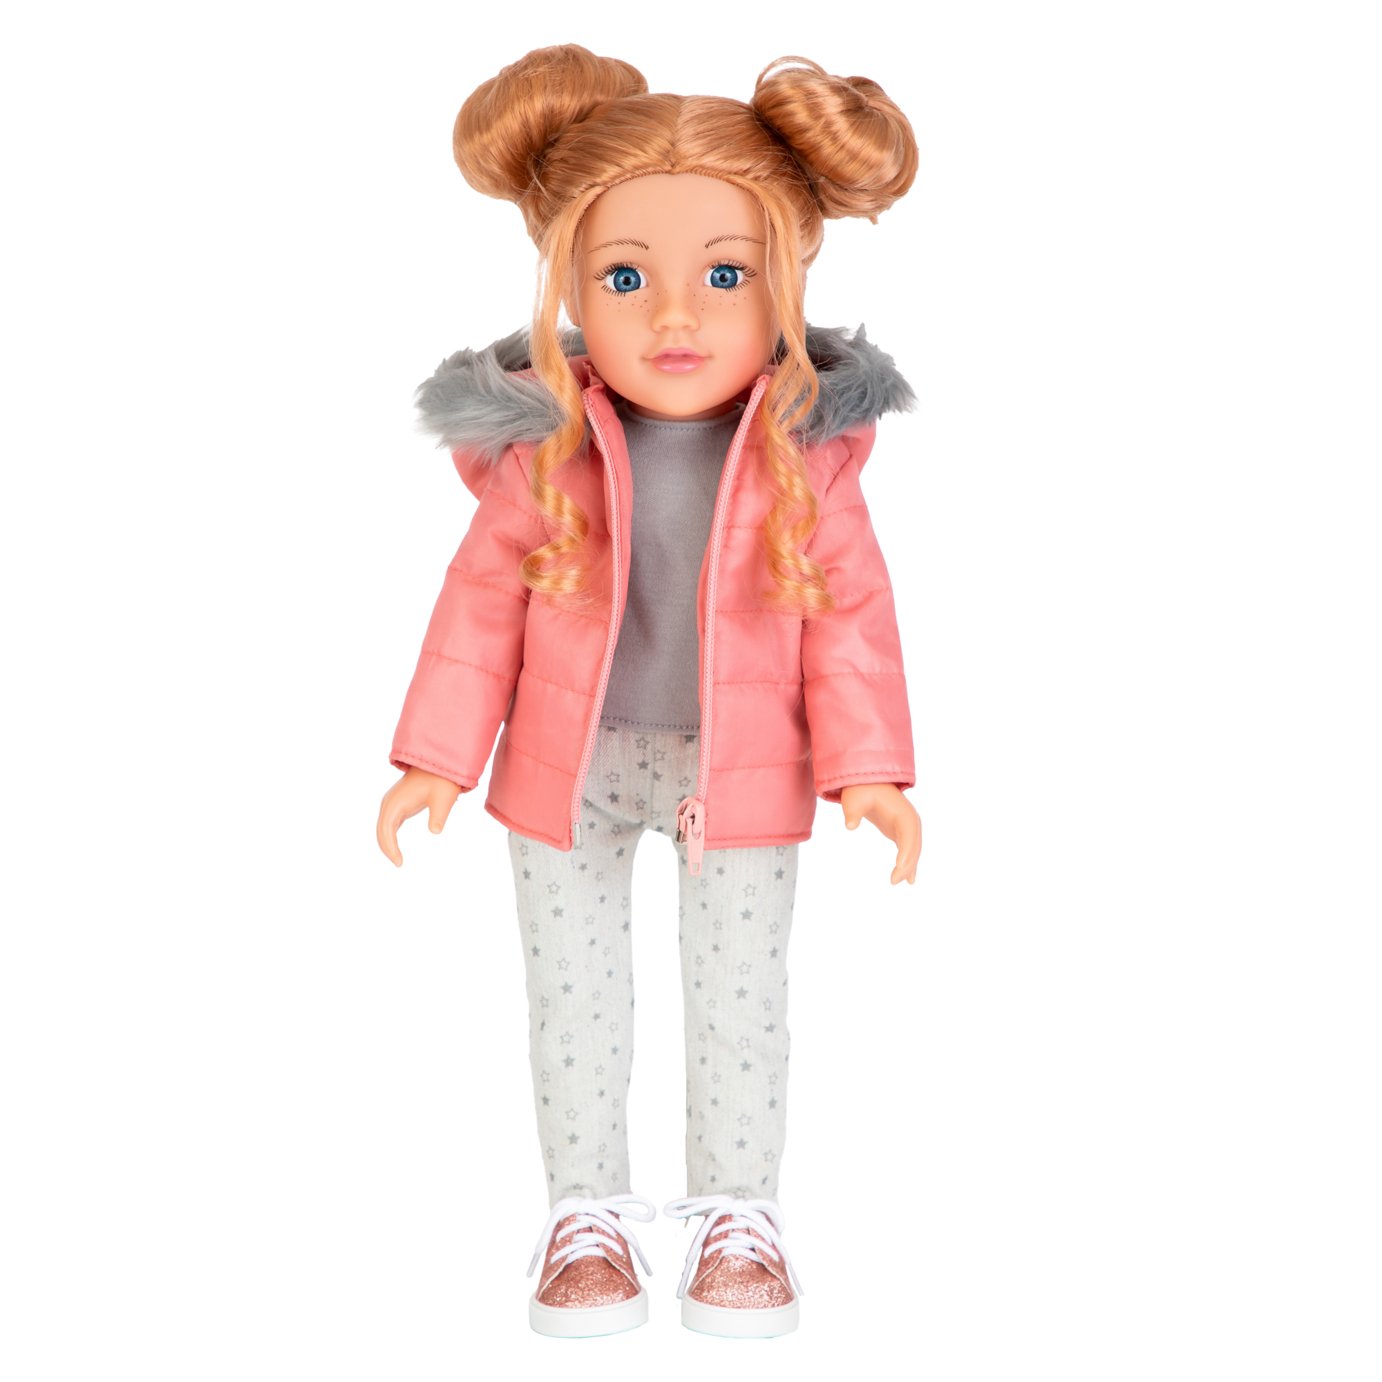 Designafriend Winter Warmer Doll Outfit Review